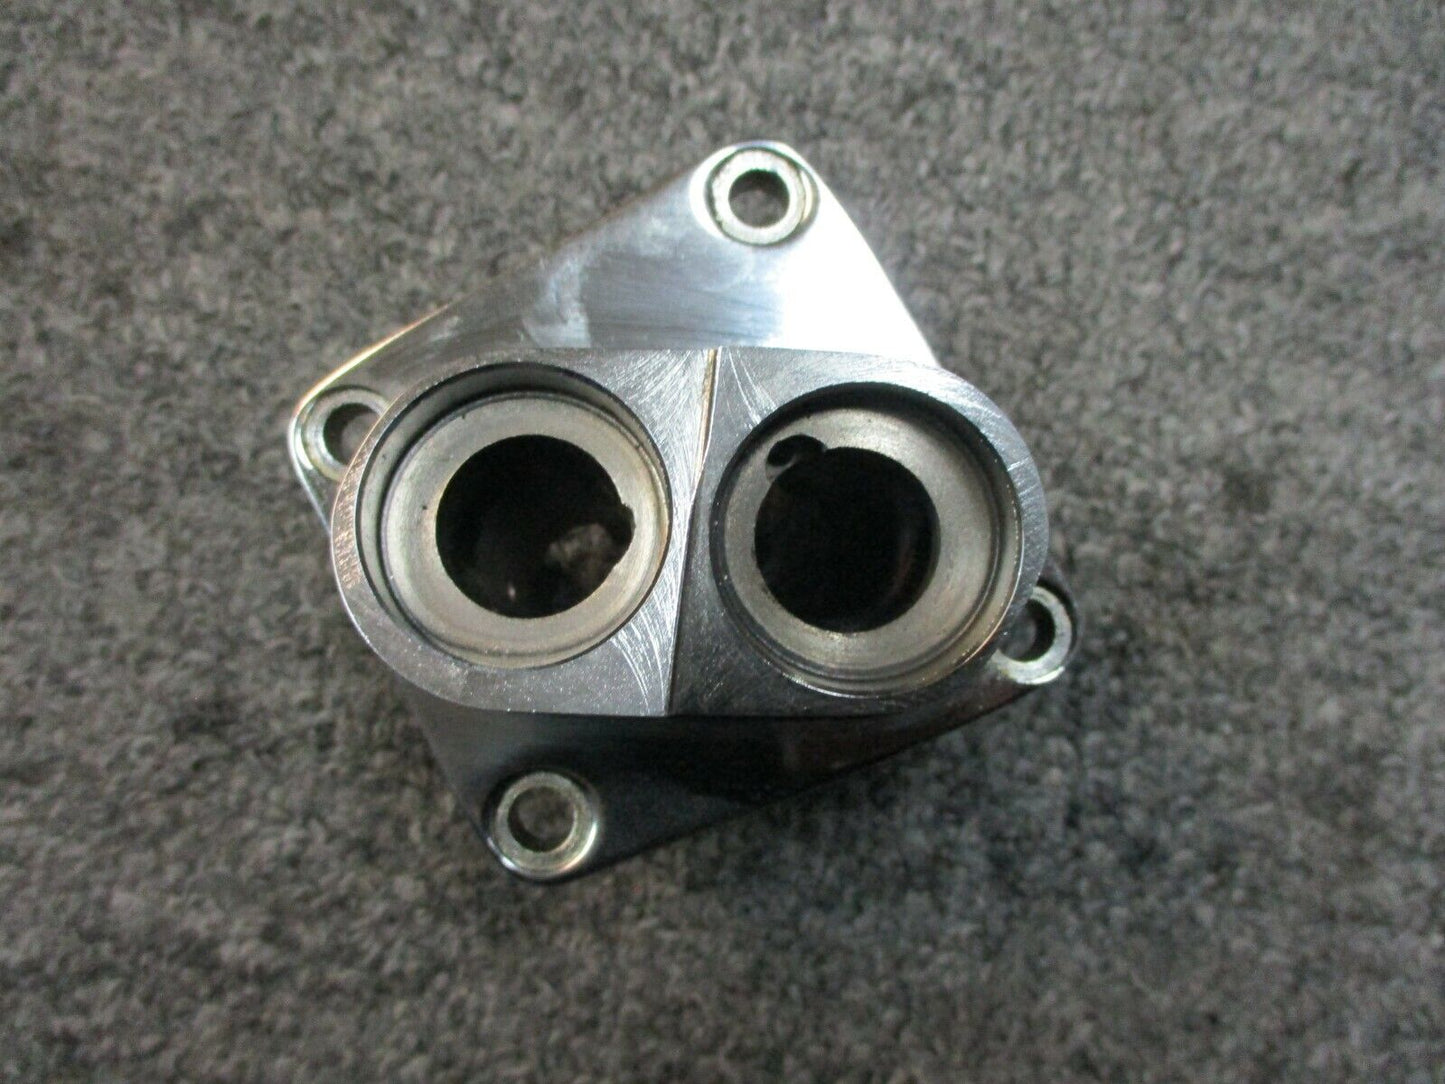 Tappet Guide Rear 80-83 FLH Shovelhead Aftermarket Replaces Harley #18603-80A